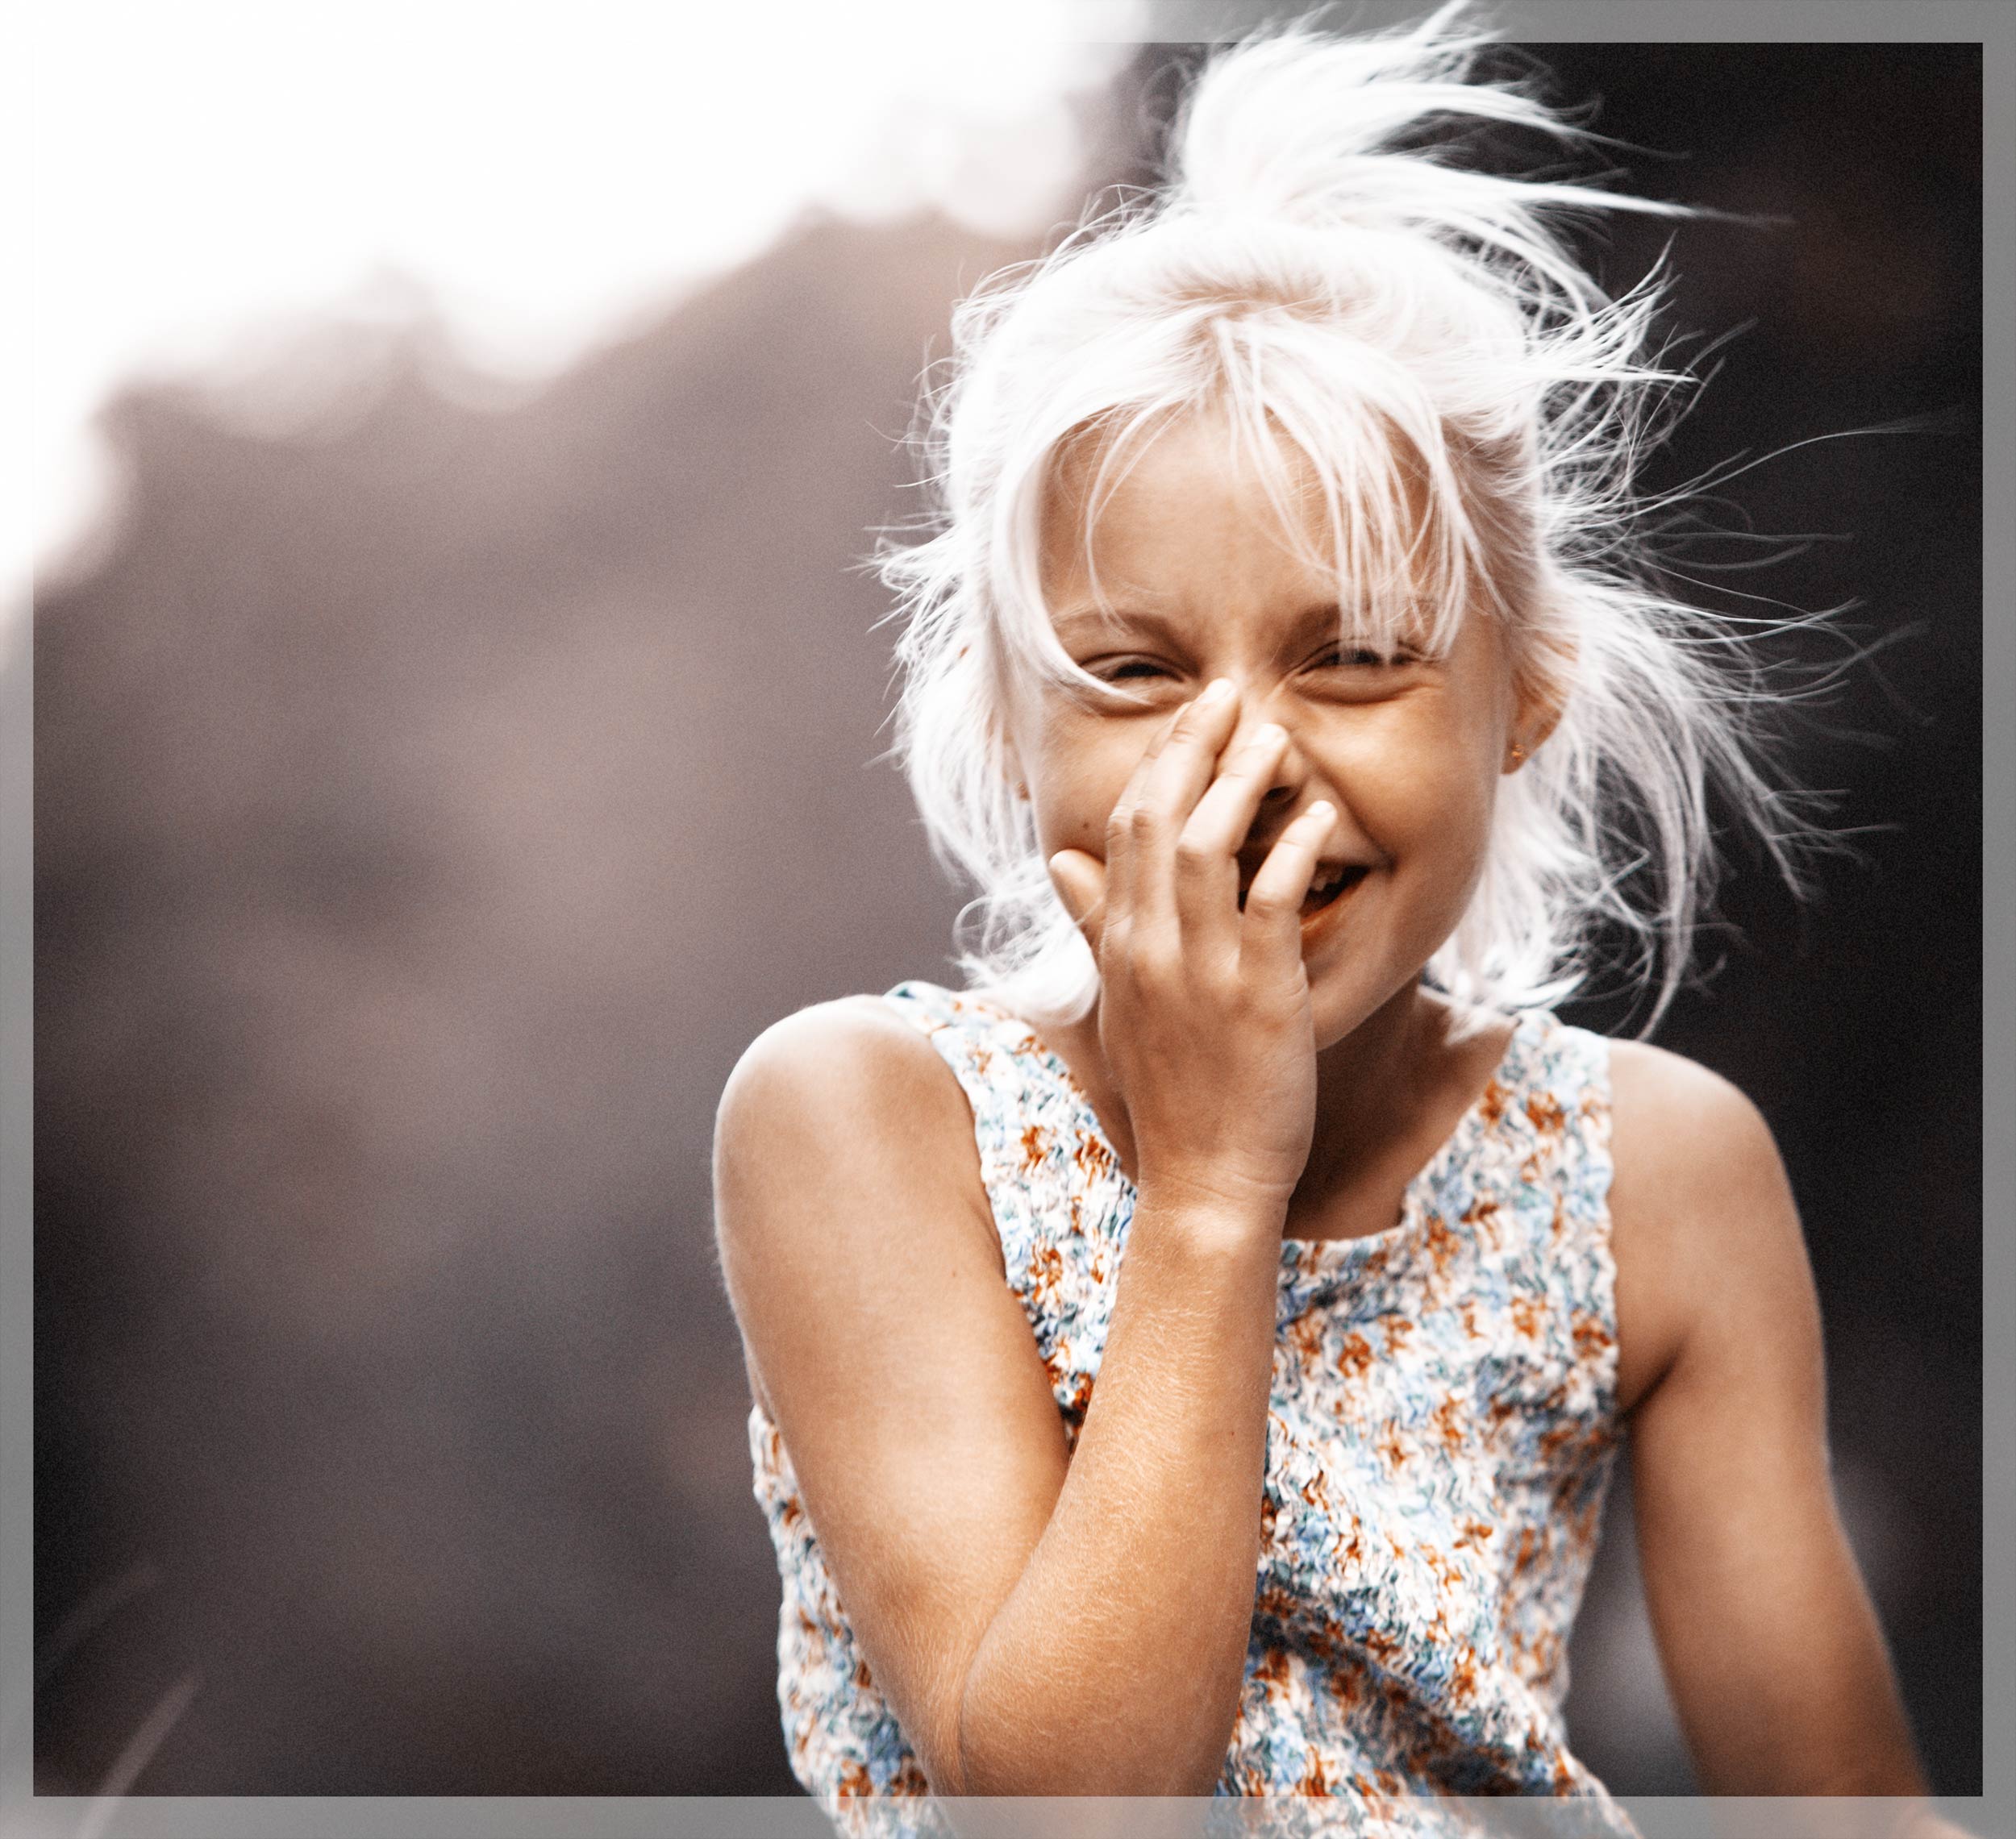 A young blonde girl covering her mouth as she laughs with the wind blowing her hair